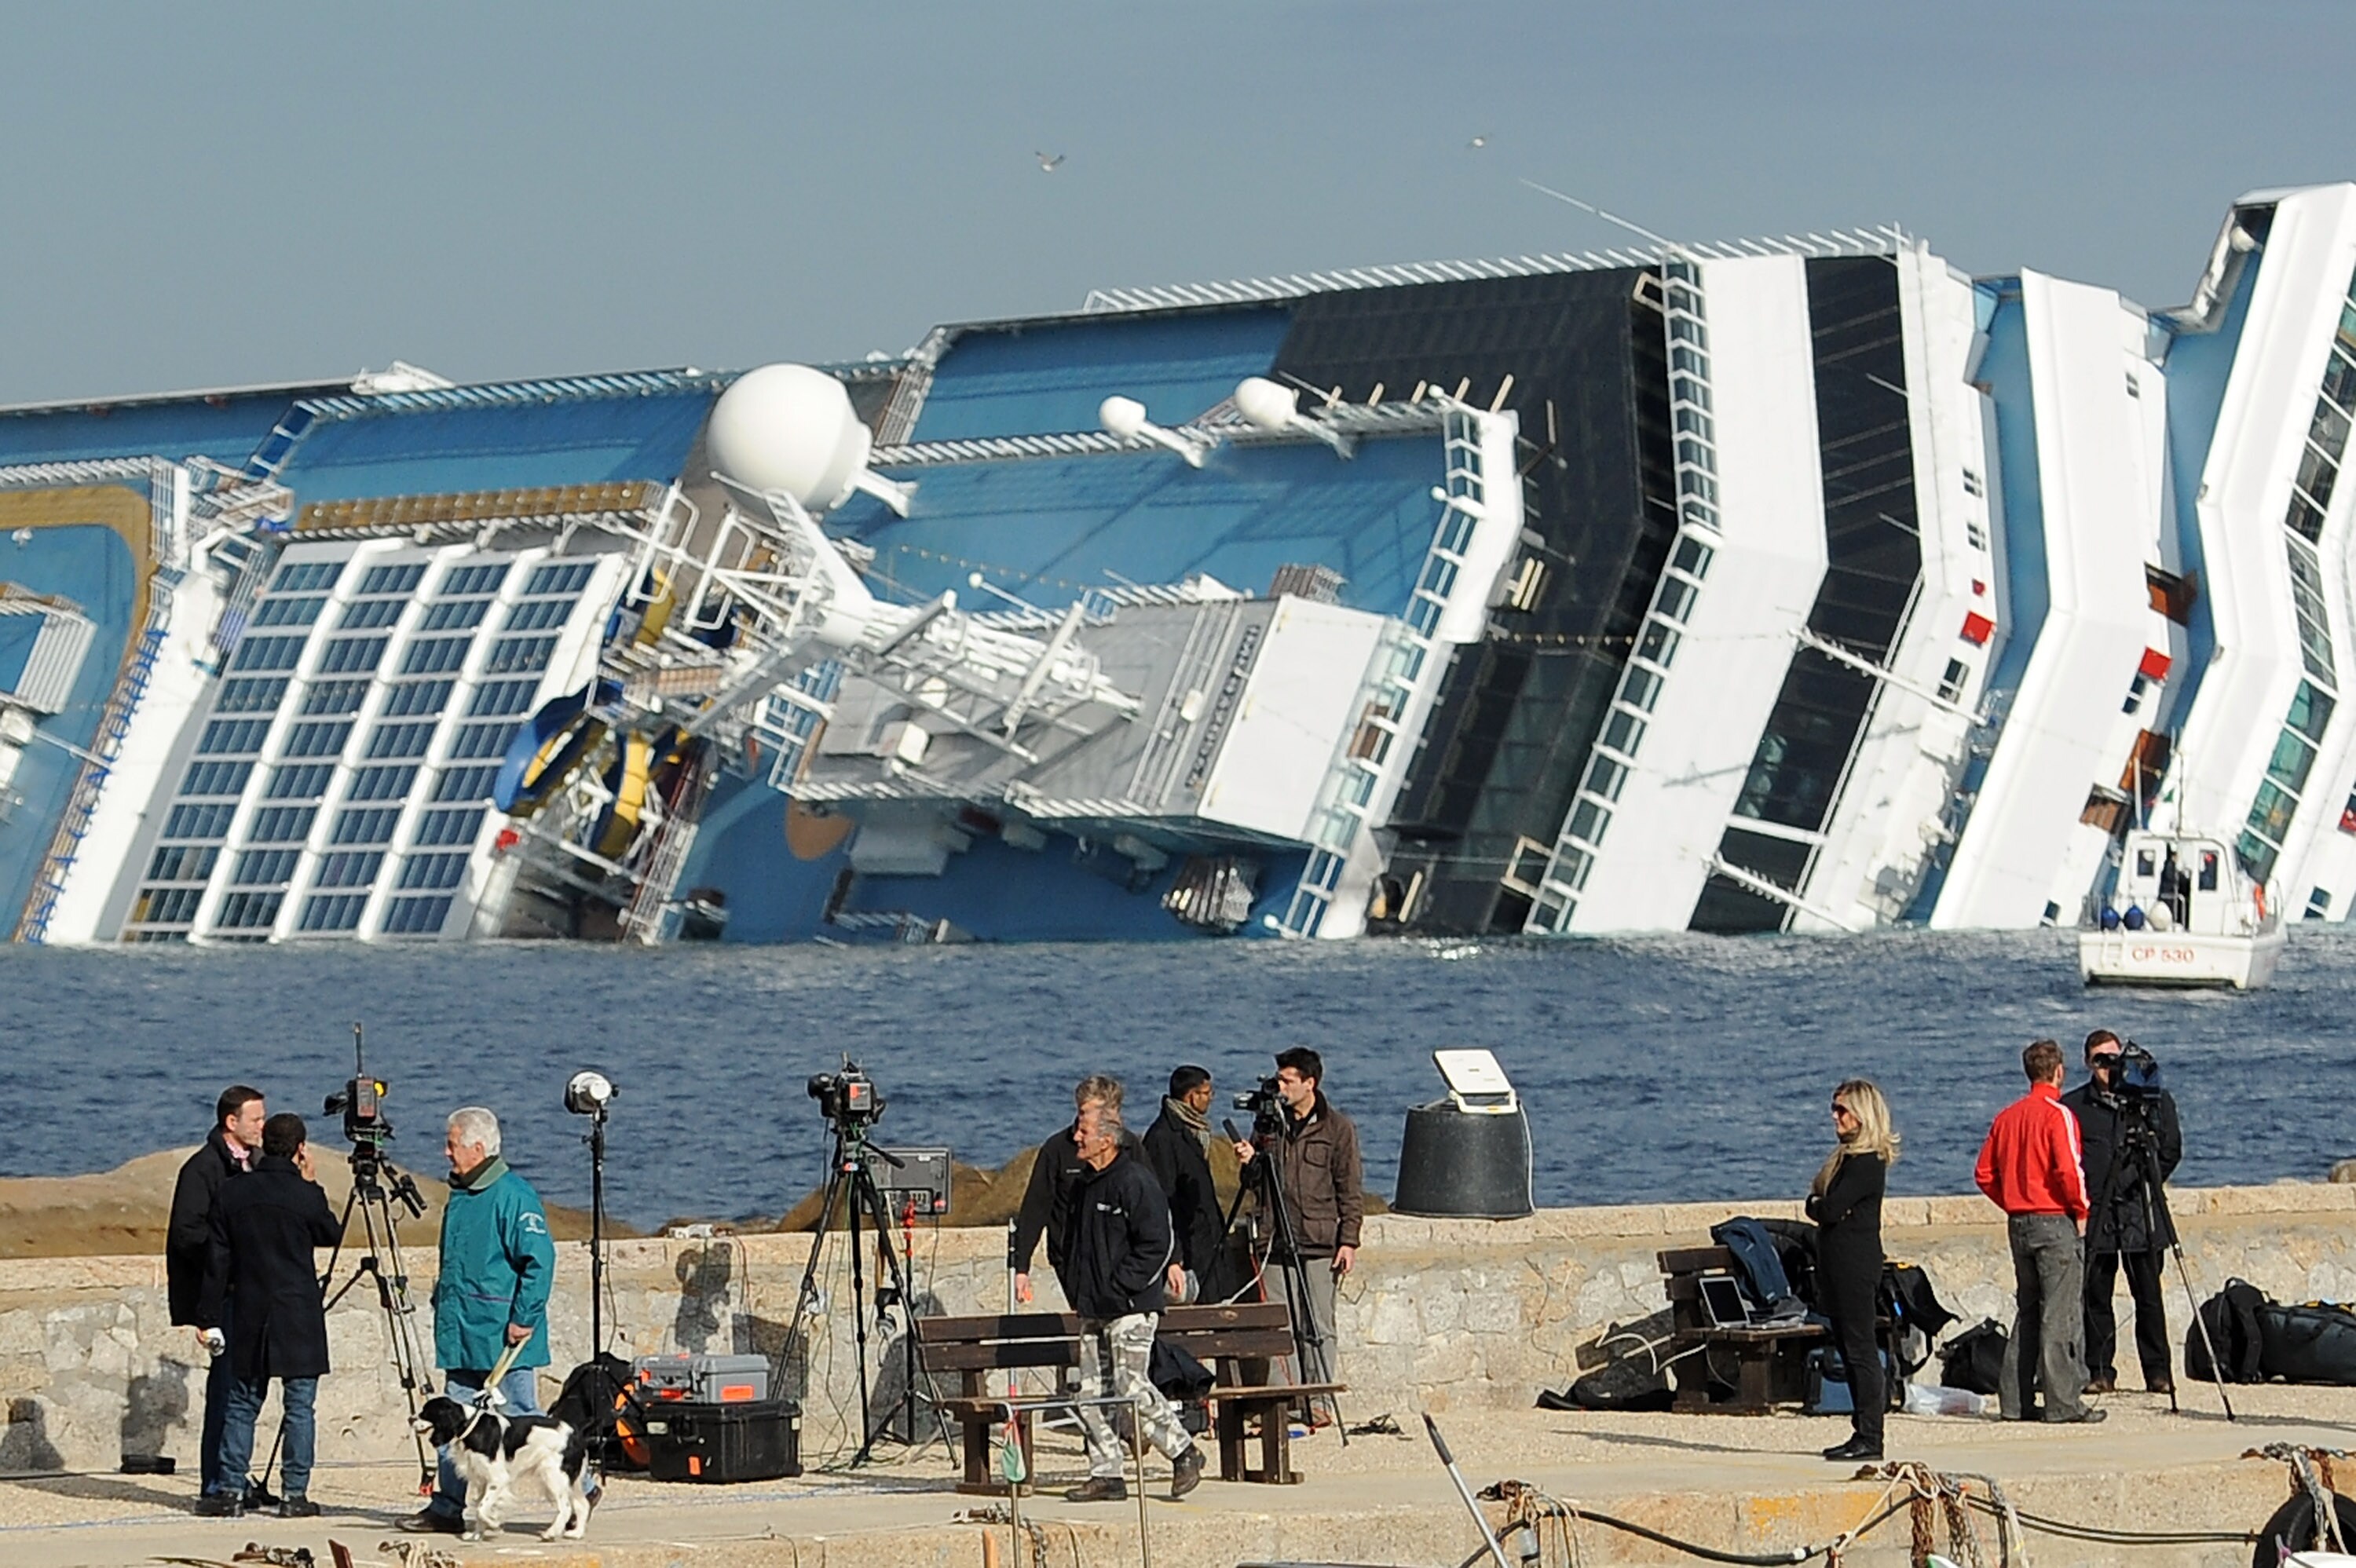 In cruise ship sinking, leadership failures from captain to Carnival